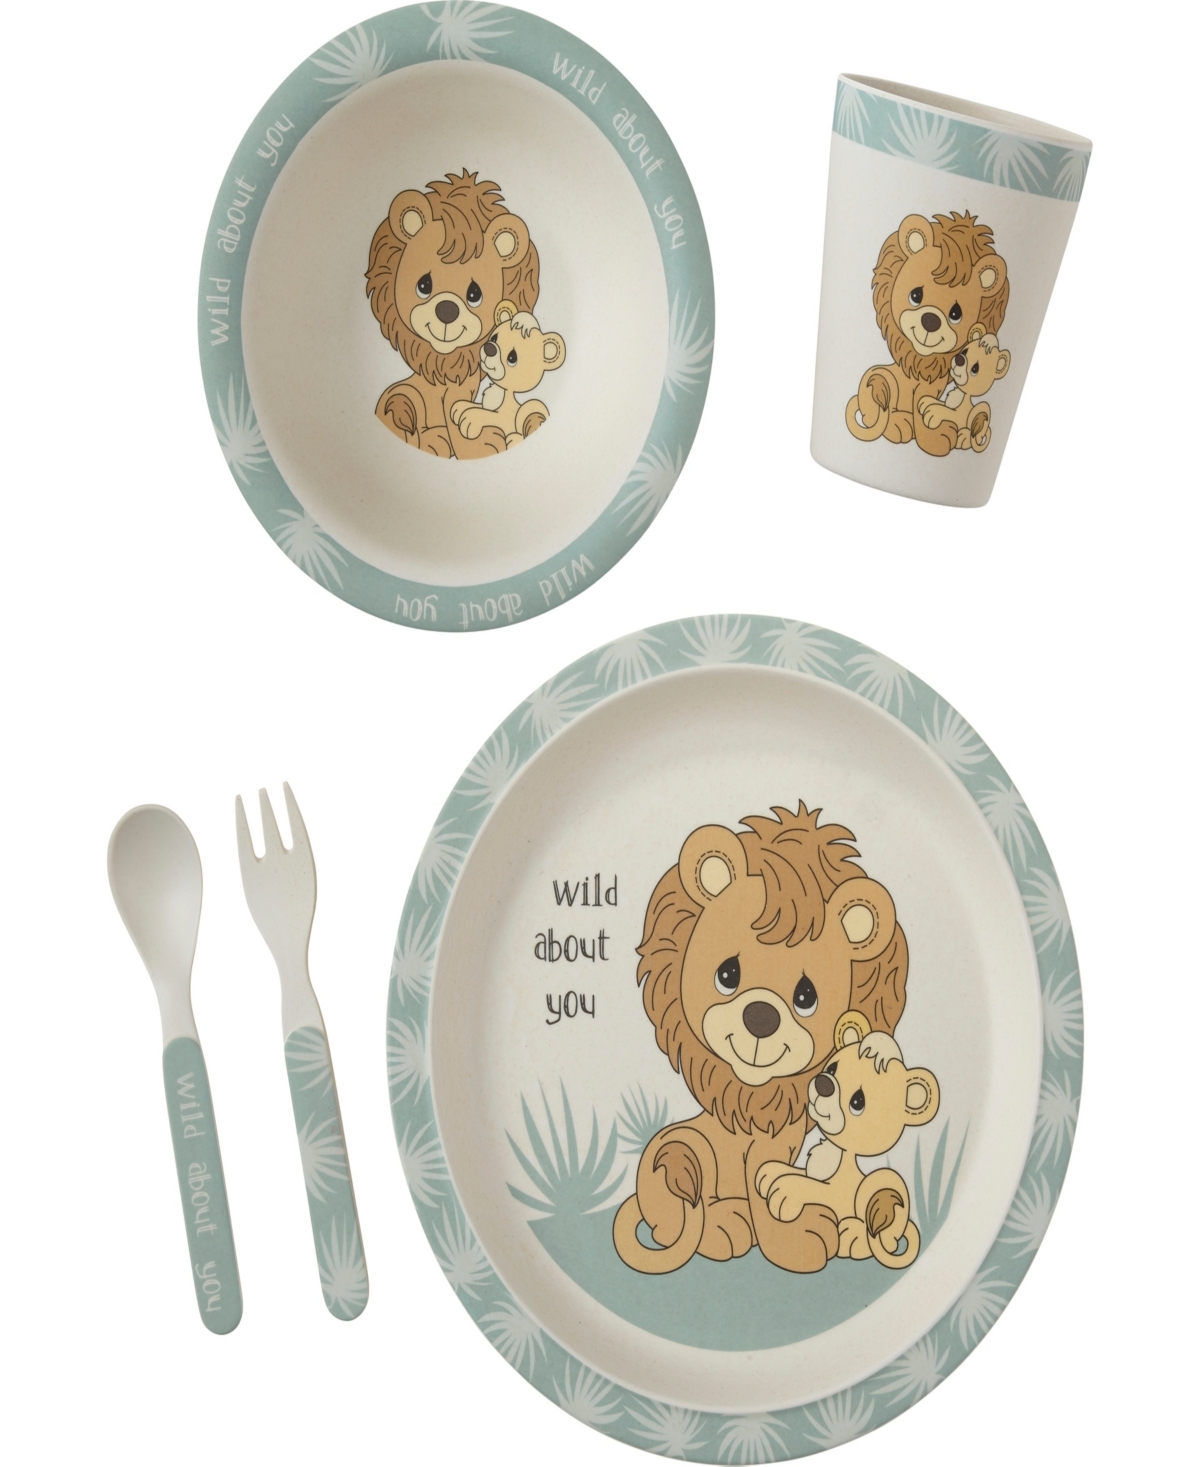 222404 Wild About You 5-Piece Bamboo Mealtime Gift Set - Multicolored